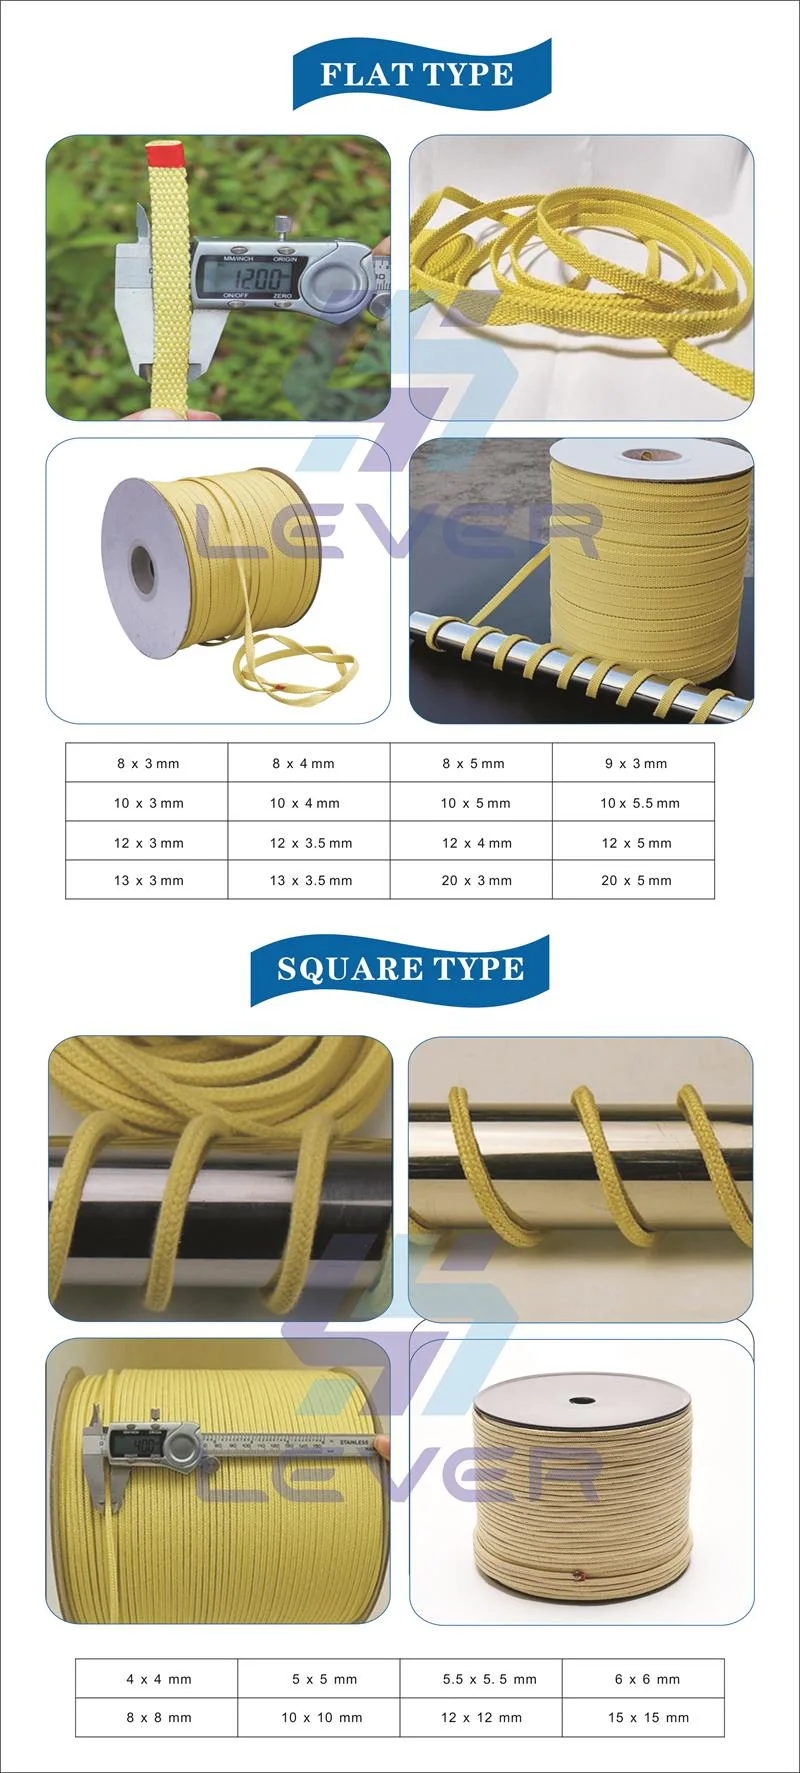 Useful Top Sell Braided Fiberglass Insulating Sleeve, High Quality Wholesale Heat Resistant Sleeves